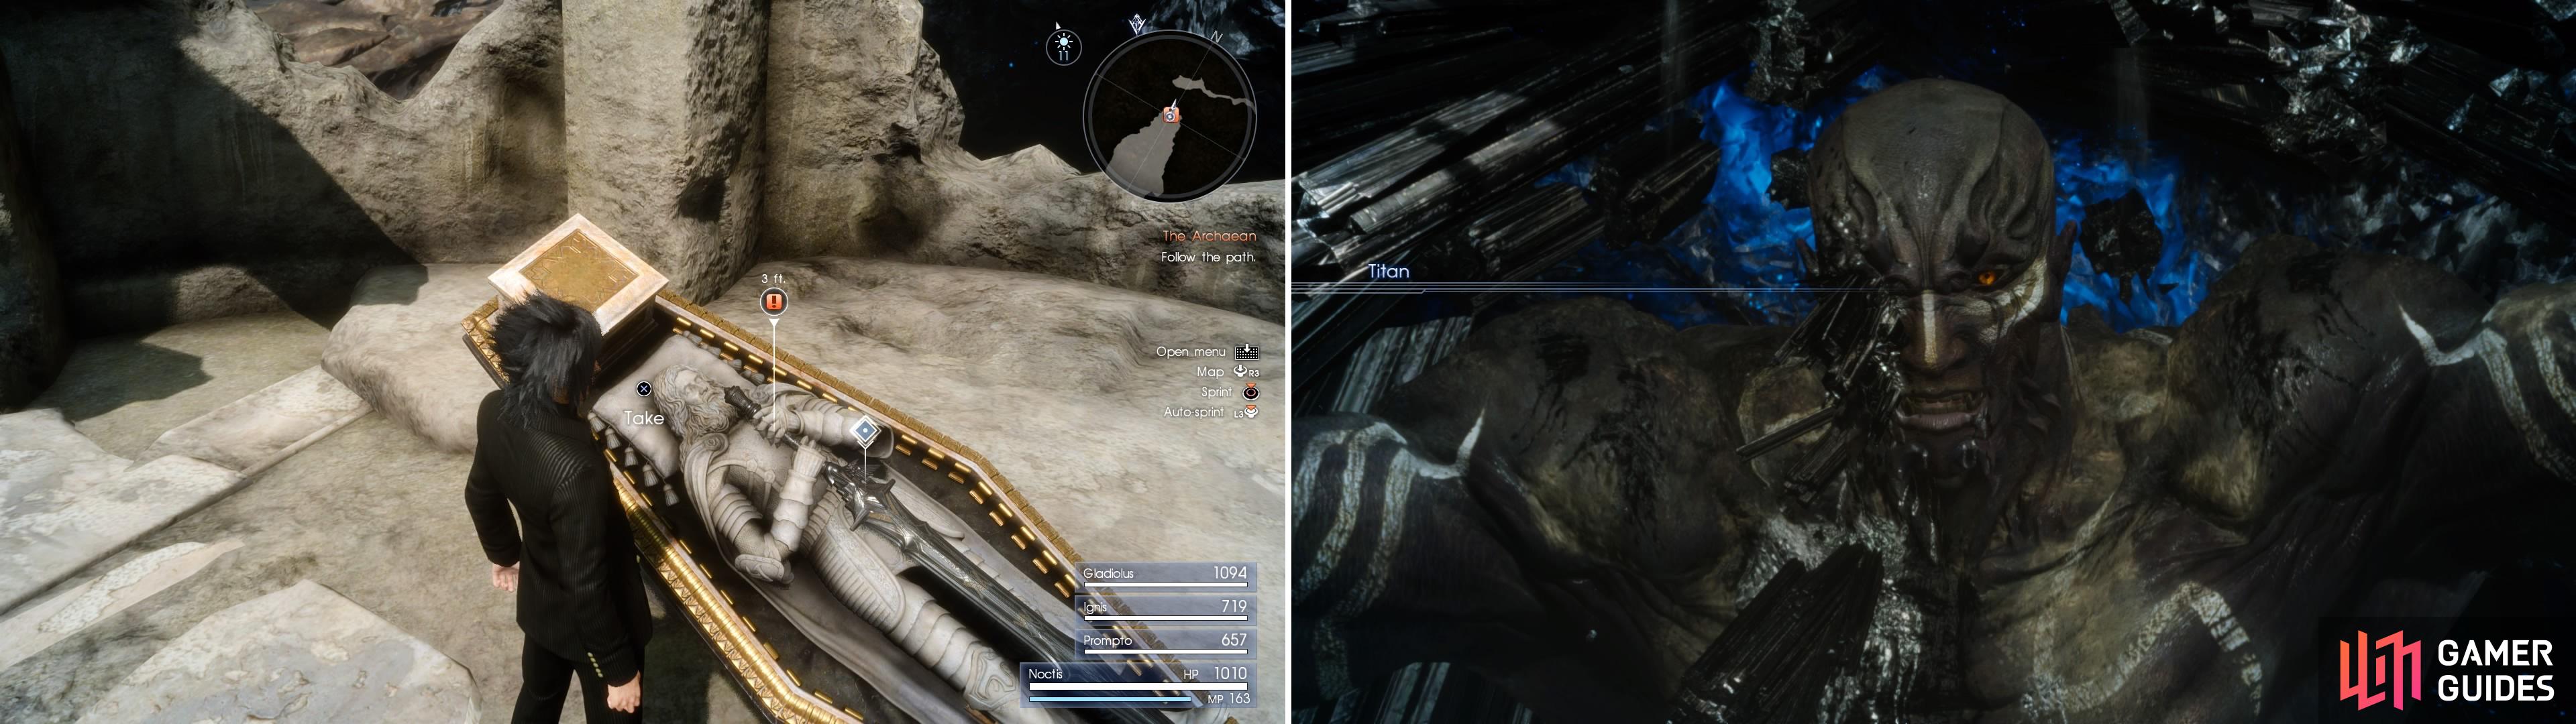 Approach the tomb and collect the Blade of the Mystic (left) after which you’ll get a nice friendly hello from The Archaean himself (right).